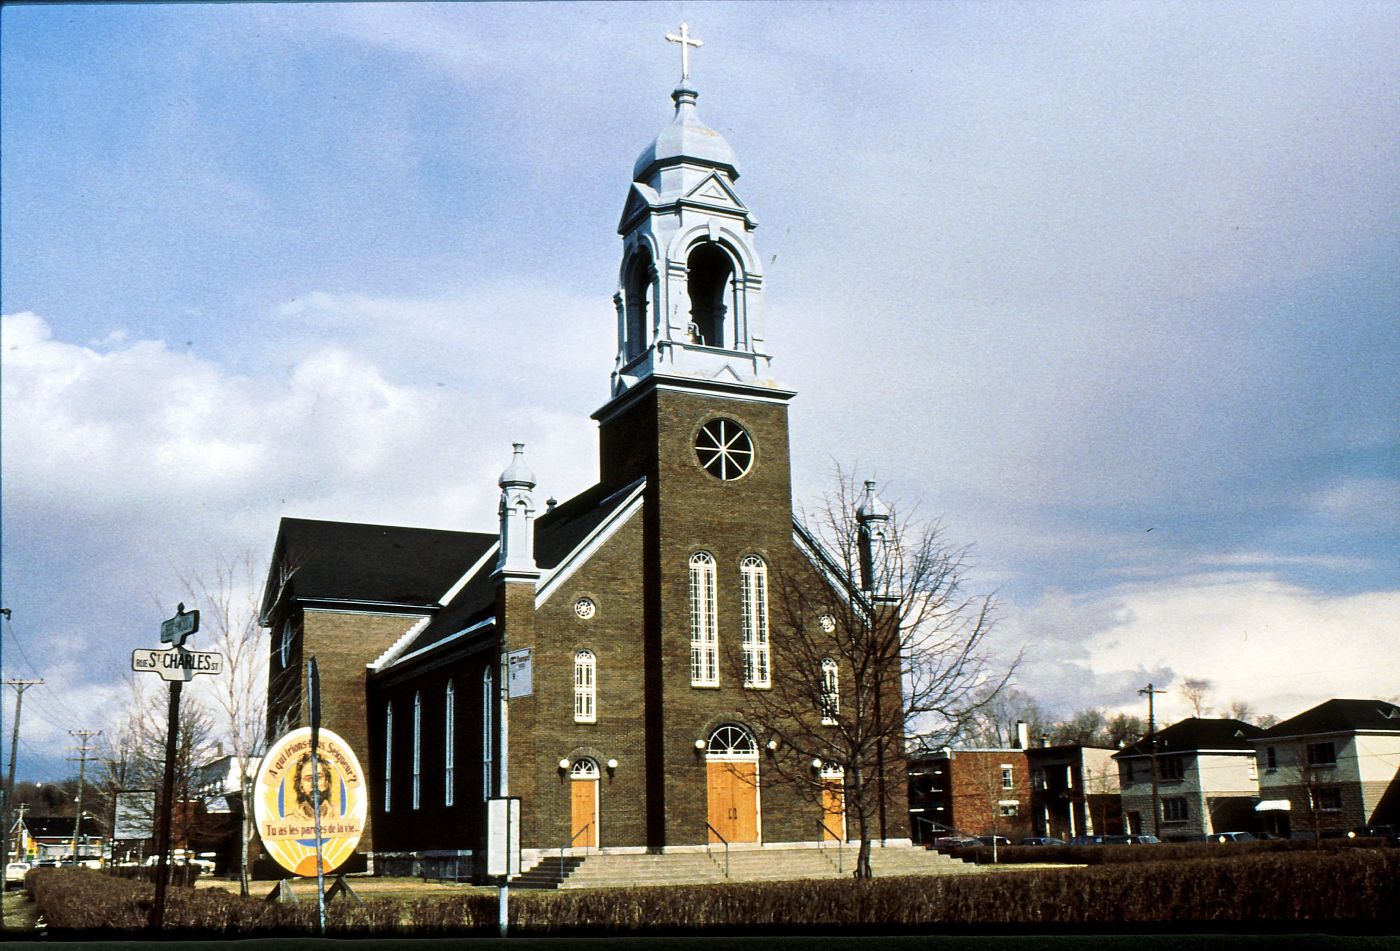 Colour photograph of a dark brown brick church with a striking silver bell tower surmounted by a cross. The facade of the church has three doors, four long windows, and a large bull’s-eye window. The church is located near a busy street, in a residential area.